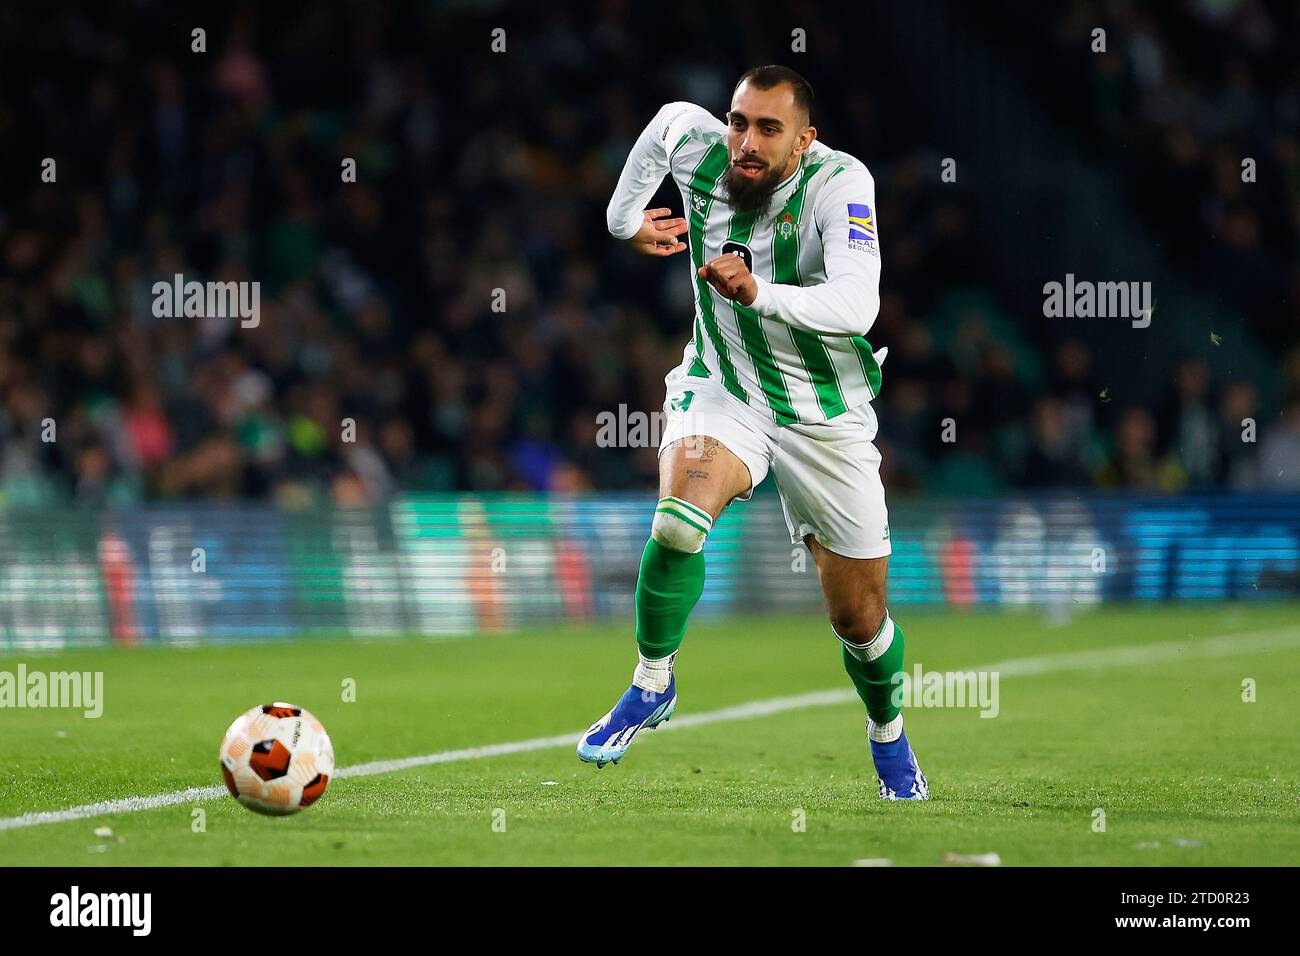 Seville, Spain. 14th December 2023. Borja Iglesias (9) of Real Betis seen during the UEFA Europa League match between Real Betis and Rangers at the Estadio Benito Villamarin in Seville. (Photo credit: Gonzales Photo - Andres Gongora). Credit: Gonzales Photo/Alamy Live News Stock Photo